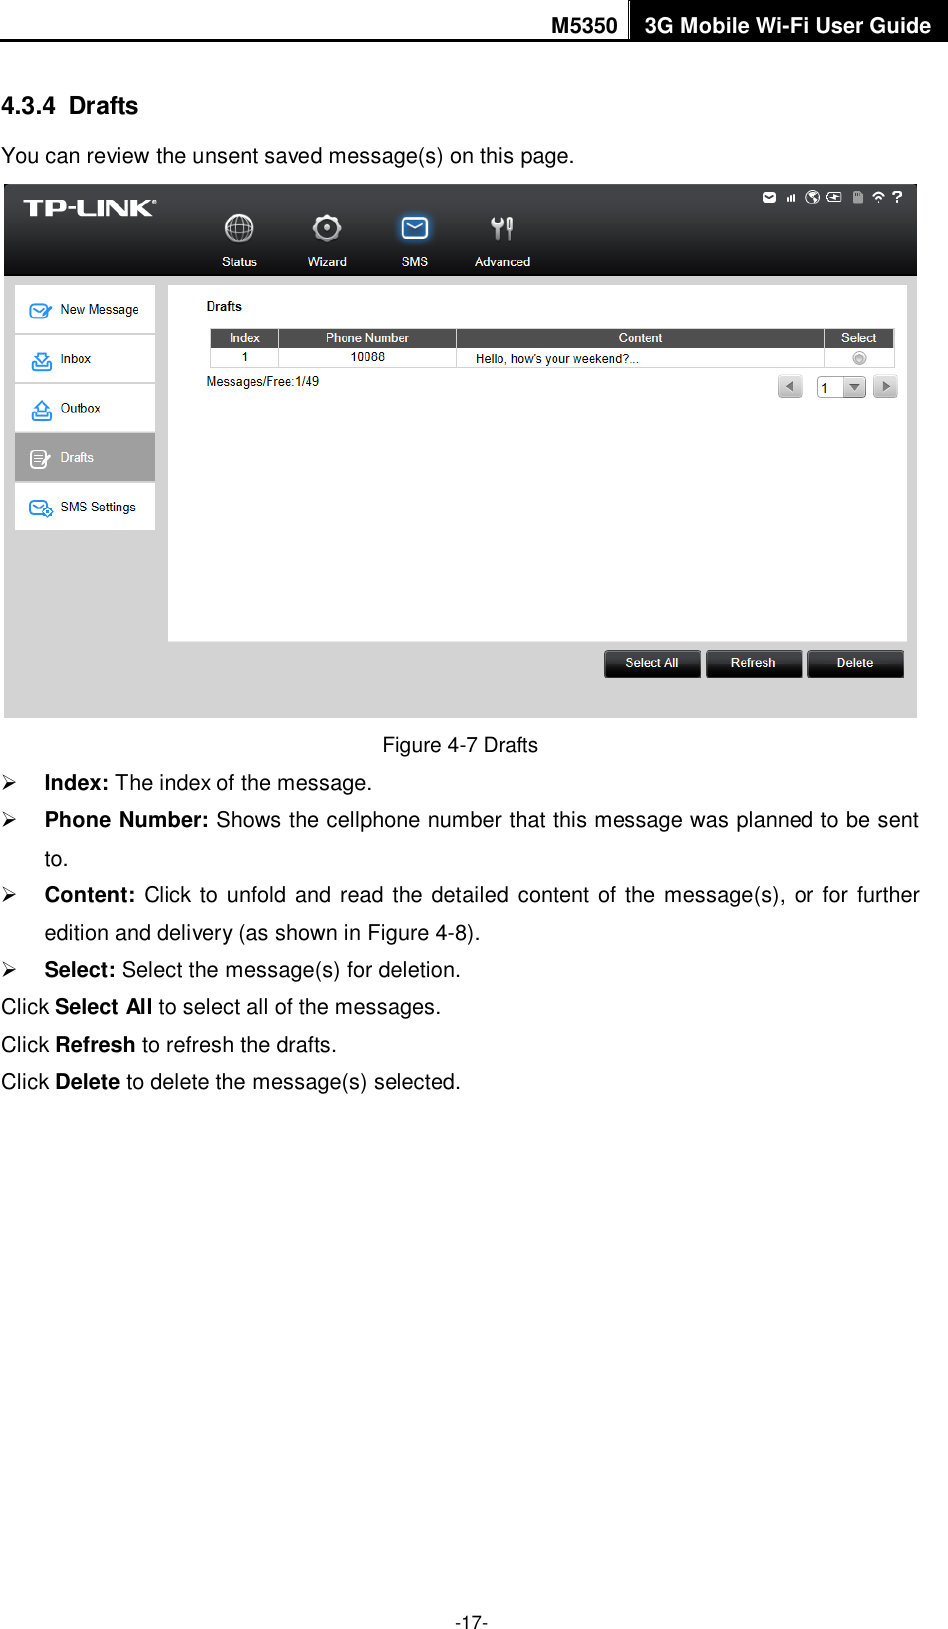 M5350 3G Mobile Wi-Fi User Guide  -17- 4.3.4  Drafts You can review the unsent saved message(s) on this page.  Figure 4-7 Drafts  Index: The index of the message.  Phone Number: Shows the cellphone number that this message was planned to be sent to.  Content: Click to unfold and read the detailed content of the message(s), or for further edition and delivery (as shown in Figure 4-8).  Select: Select the message(s) for deletion. Click Select All to select all of the messages. Click Refresh to refresh the drafts. Click Delete to delete the message(s) selected. 